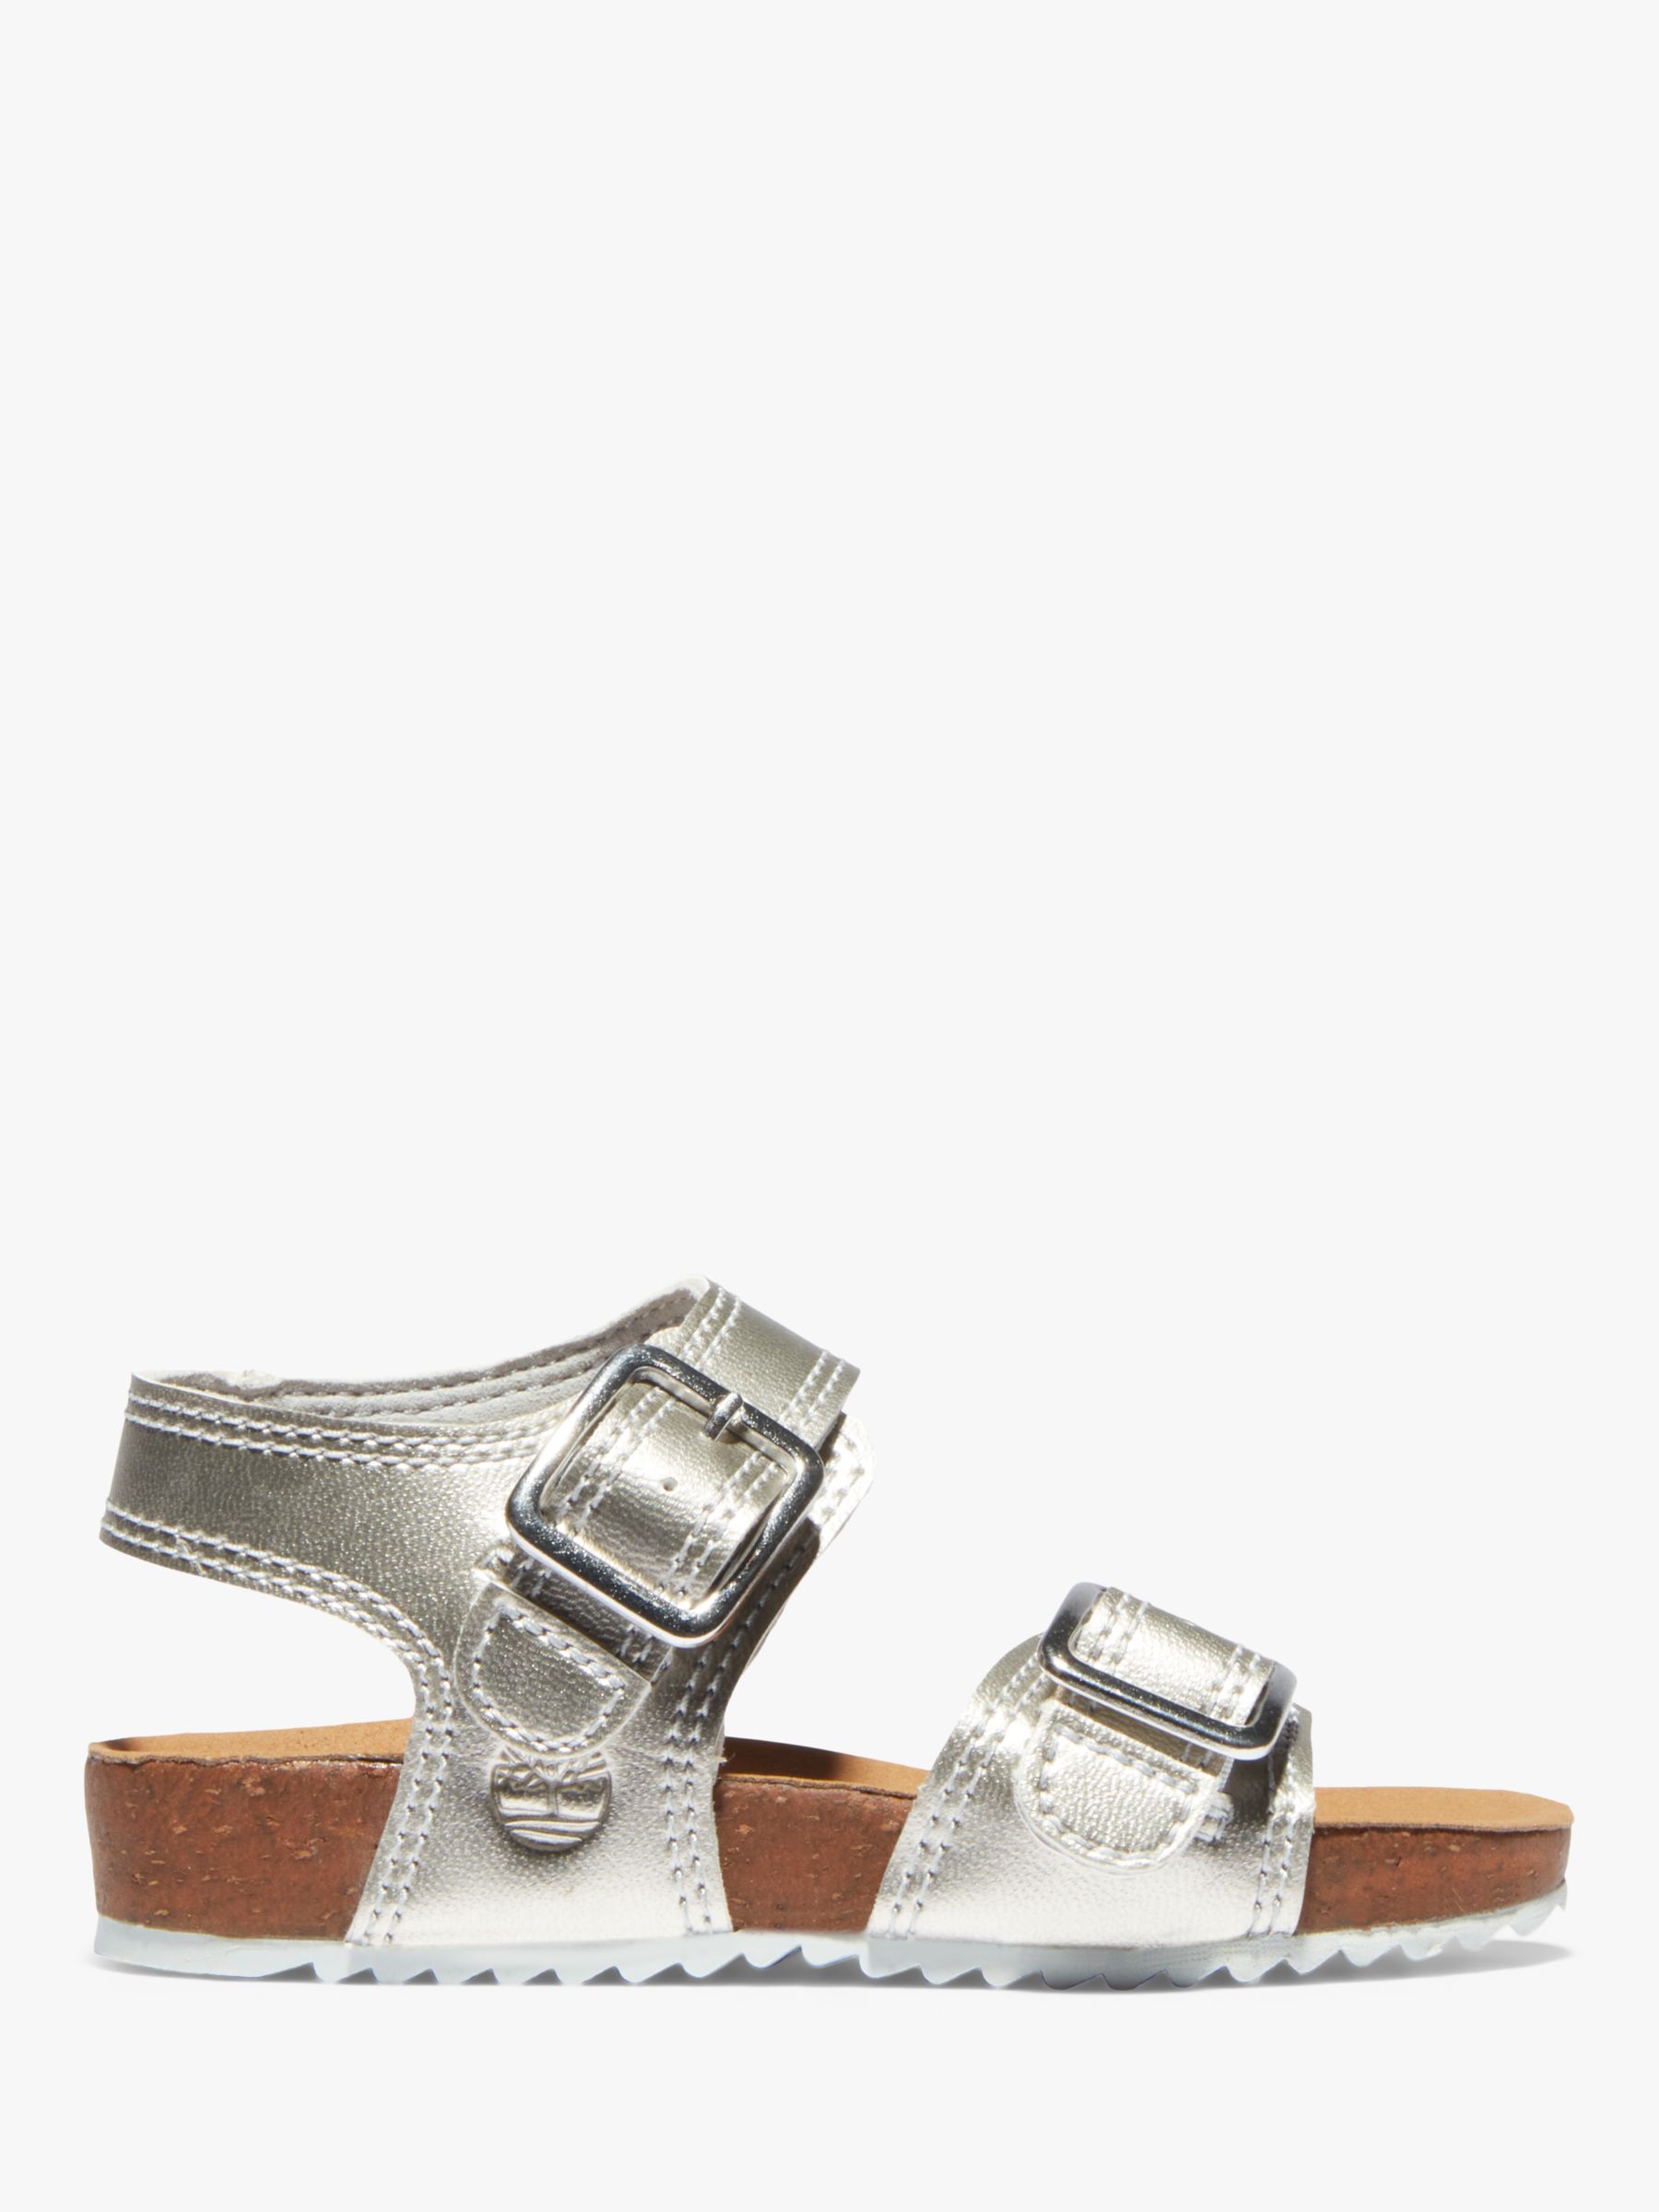 serie huurling Auckland Timberland Children's Castle Island Sandals, Silver at John Lewis & Partners